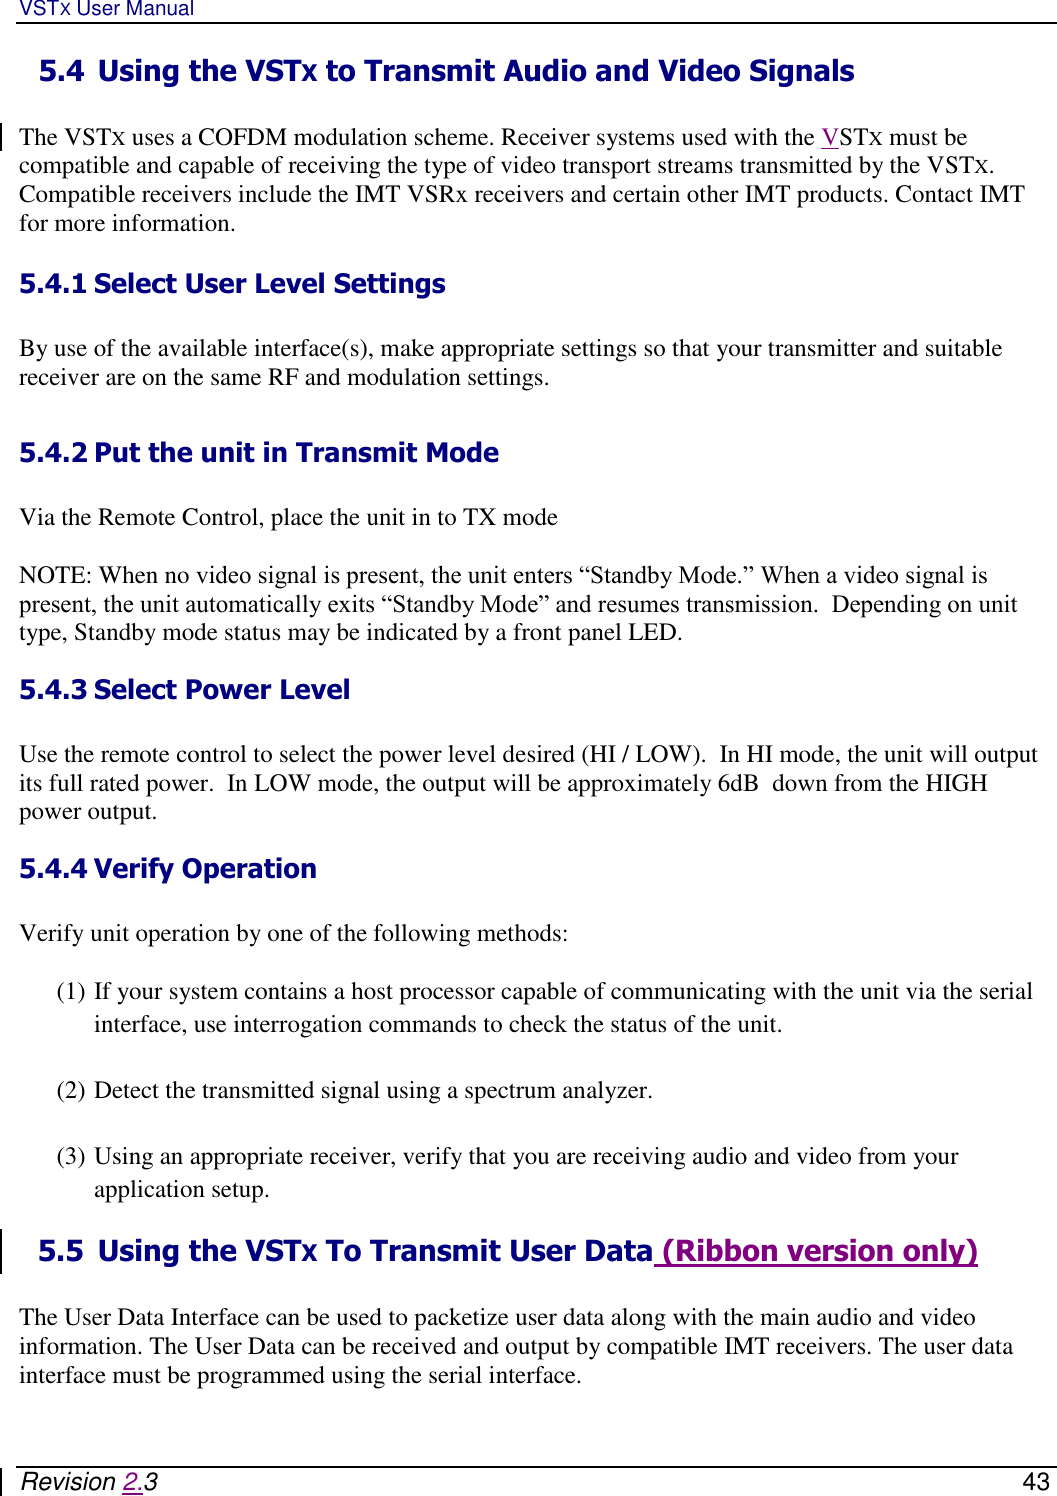 VSTX User Manual   Revision 2.3    43 5.4 Using the VSTX to Transmit Audio and Video Signals  The VSTX uses a COFDM modulation scheme. Receiver systems used with the VSTX must be compatible and capable of receiving the type of video transport streams transmitted by the VSTX.  Compatible receivers include the IMT VSRx receivers and certain other IMT products. Contact IMT for more information.   5.4.1 Select User Level Settings   By use of the available interface(s), make appropriate settings so that your transmitter and suitable receiver are on the same RF and modulation settings.  5.4.2 Put the unit in Transmit Mode   Via the Remote Control, place the unit in to TX mode   NOTE: When no video signal is present, the unit enters “Standby Mode.” When a video signal is present, the unit automatically exits “Standby Mode” and resumes transmission.  Depending on unit type, Standby mode status may be indicated by a front panel LED. 5.4.3 Select Power Level   Use the remote control to select the power level desired (HI / LOW).  In HI mode, the unit will output its full rated power.  In LOW mode, the output will be approximately 6dB  down from the HIGH power output.  5.4.4 Verify Operation   Verify unit operation by one of the following methods:  (1) If your system contains a host processor capable of communicating with the unit via the serial interface, use interrogation commands to check the status of the unit.   (2) Detect the transmitted signal using a spectrum analyzer.  (3) Using an appropriate receiver, verify that you are receiving audio and video from your application setup.  5.5 Using the VSTX To Transmit User Data (Ribbon version only)  The User Data Interface can be used to packetize user data along with the main audio and video information. The User Data can be received and output by compatible IMT receivers. The user data interface must be programmed using the serial interface.  